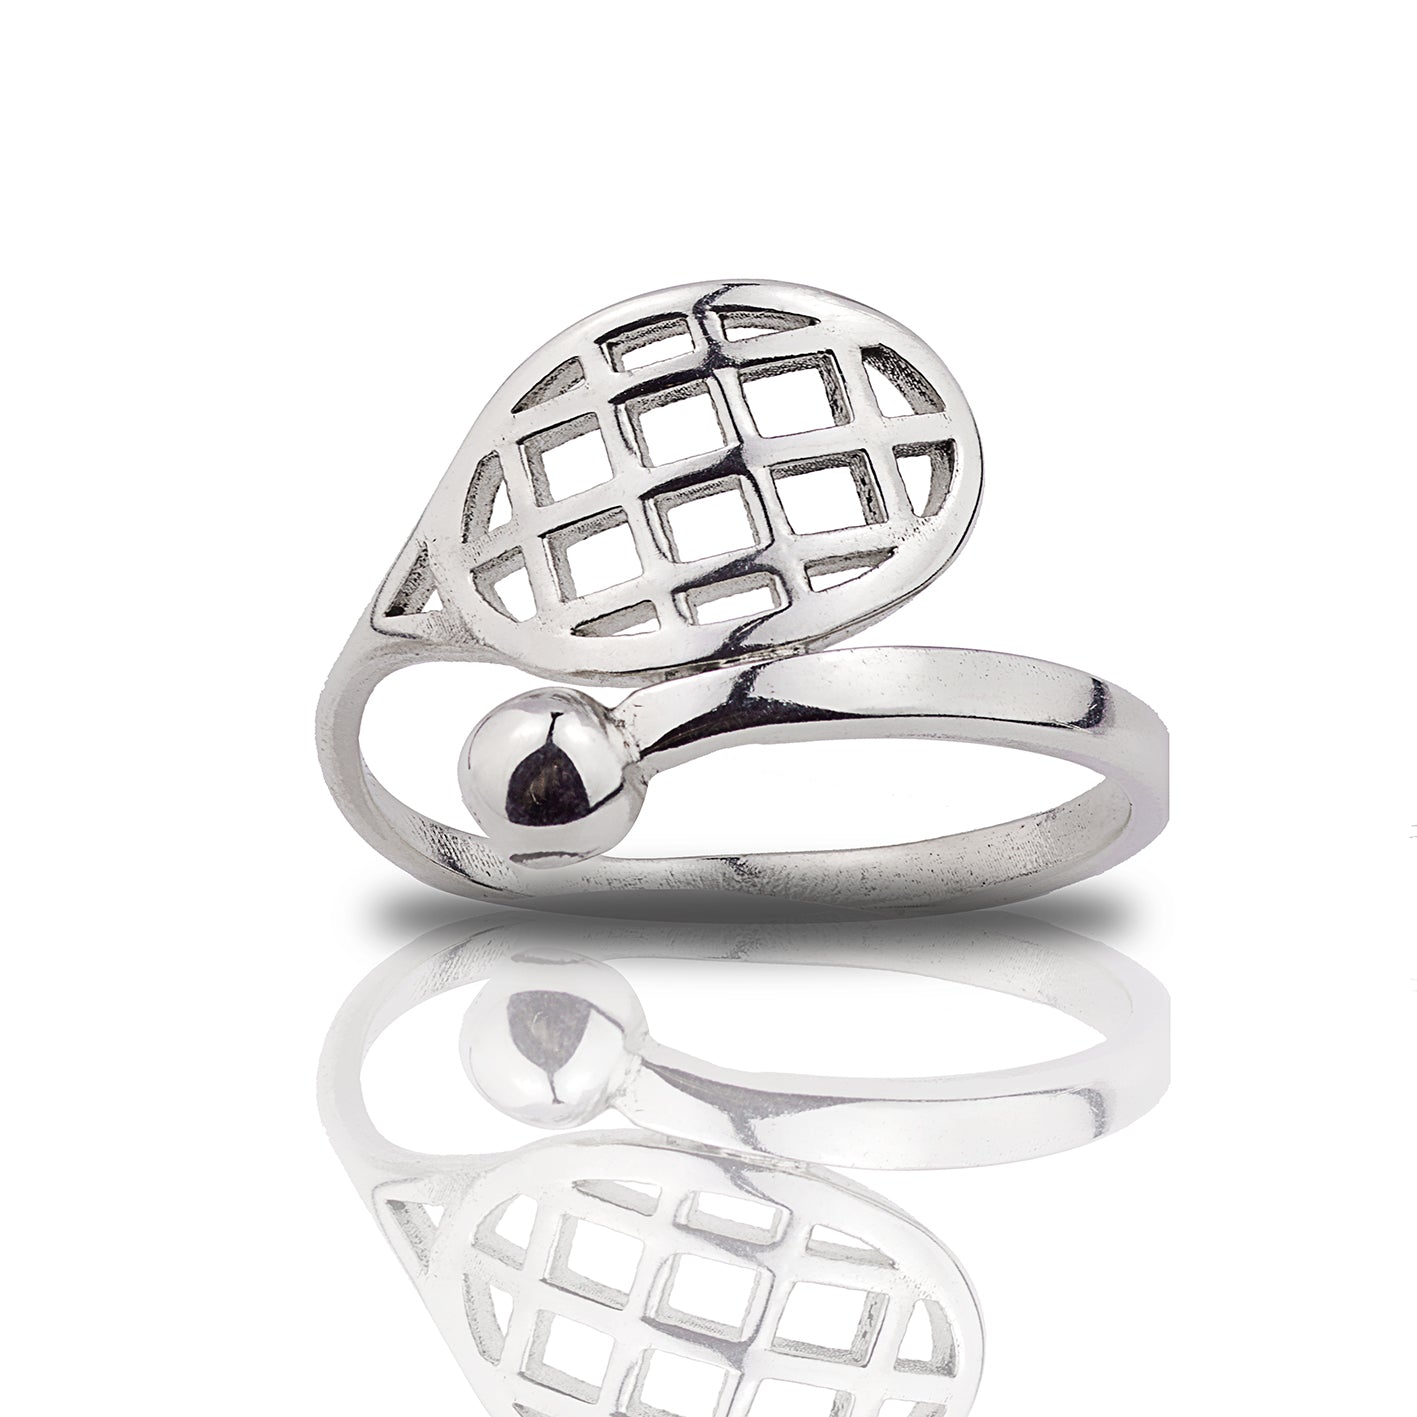 Sterling Silver Tennis Racket Ring with Ball